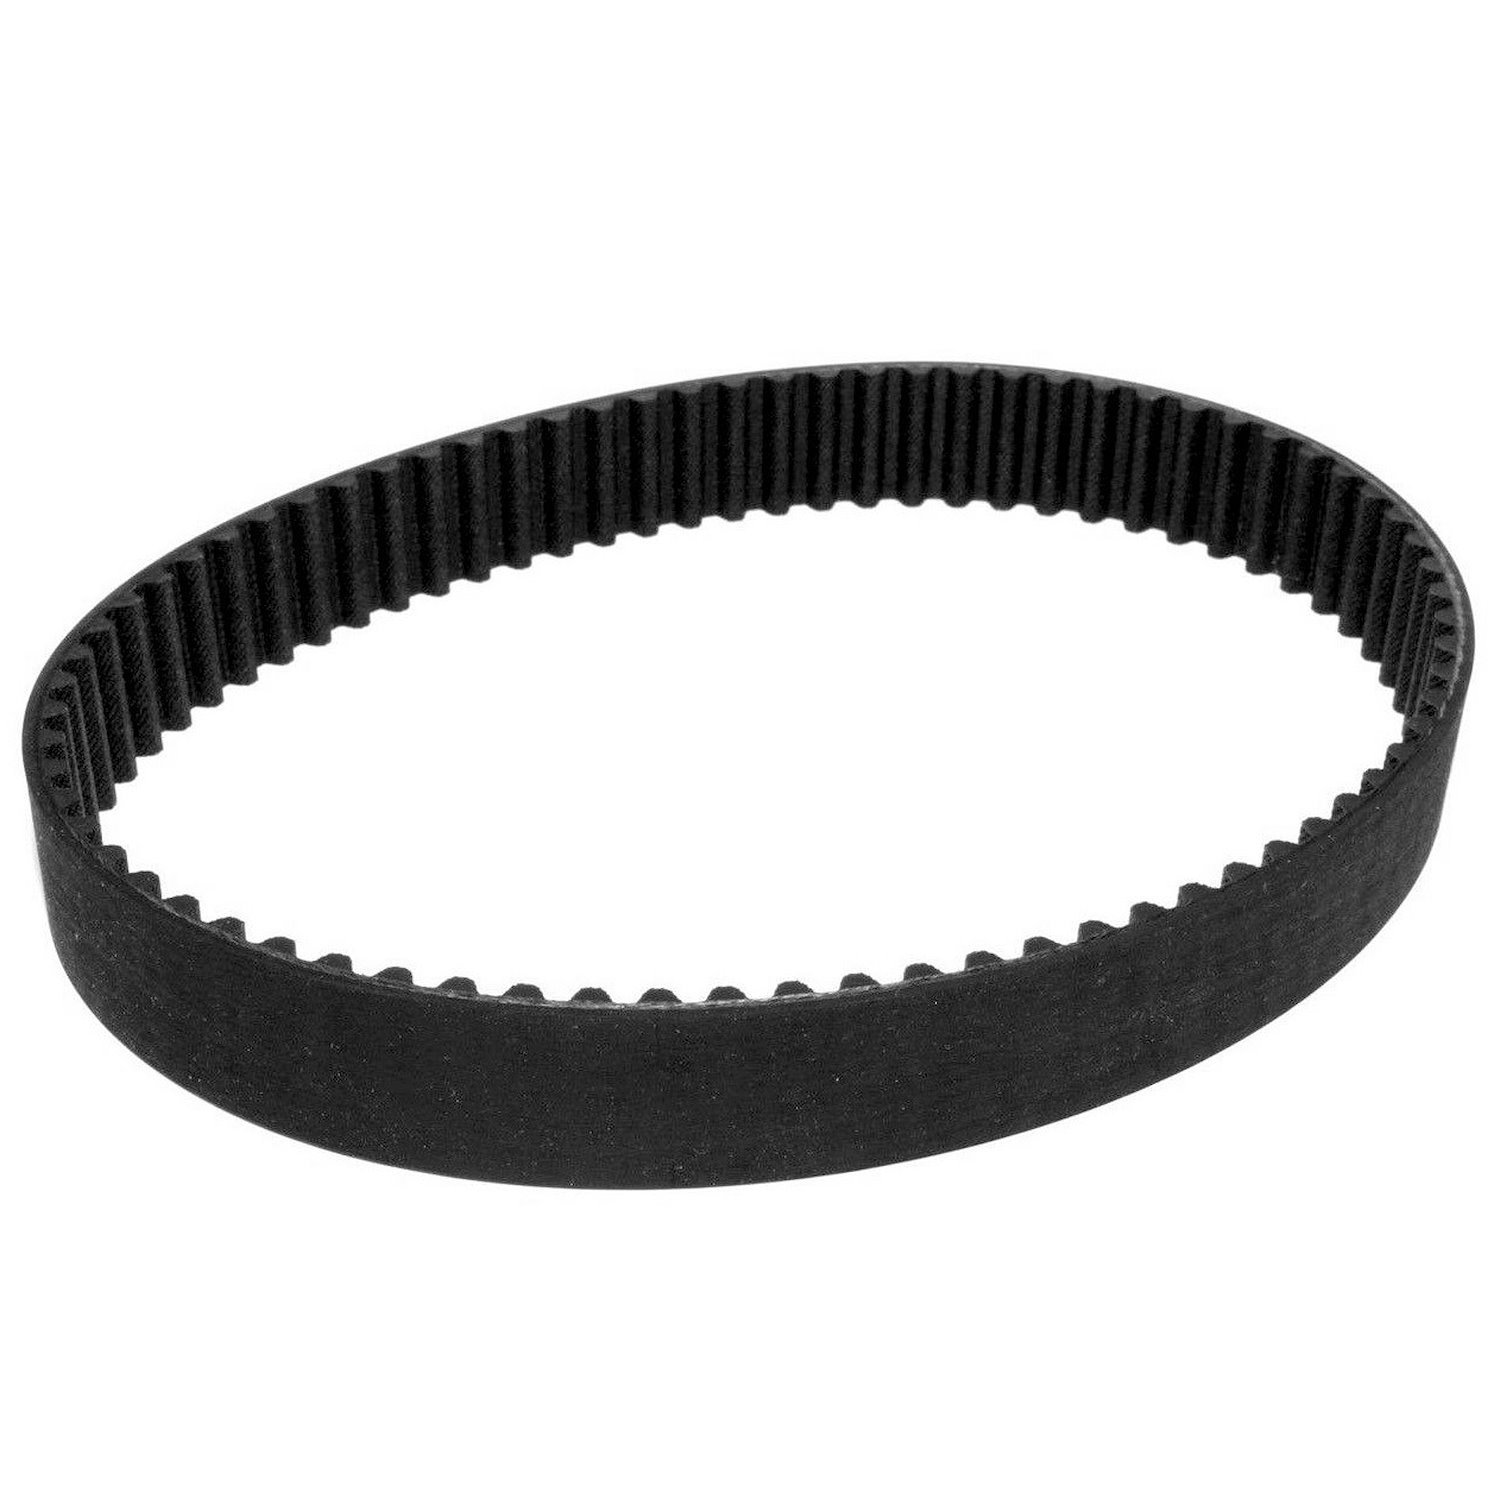 Replacement Timing Belt for Speedmaster PCE262.1005